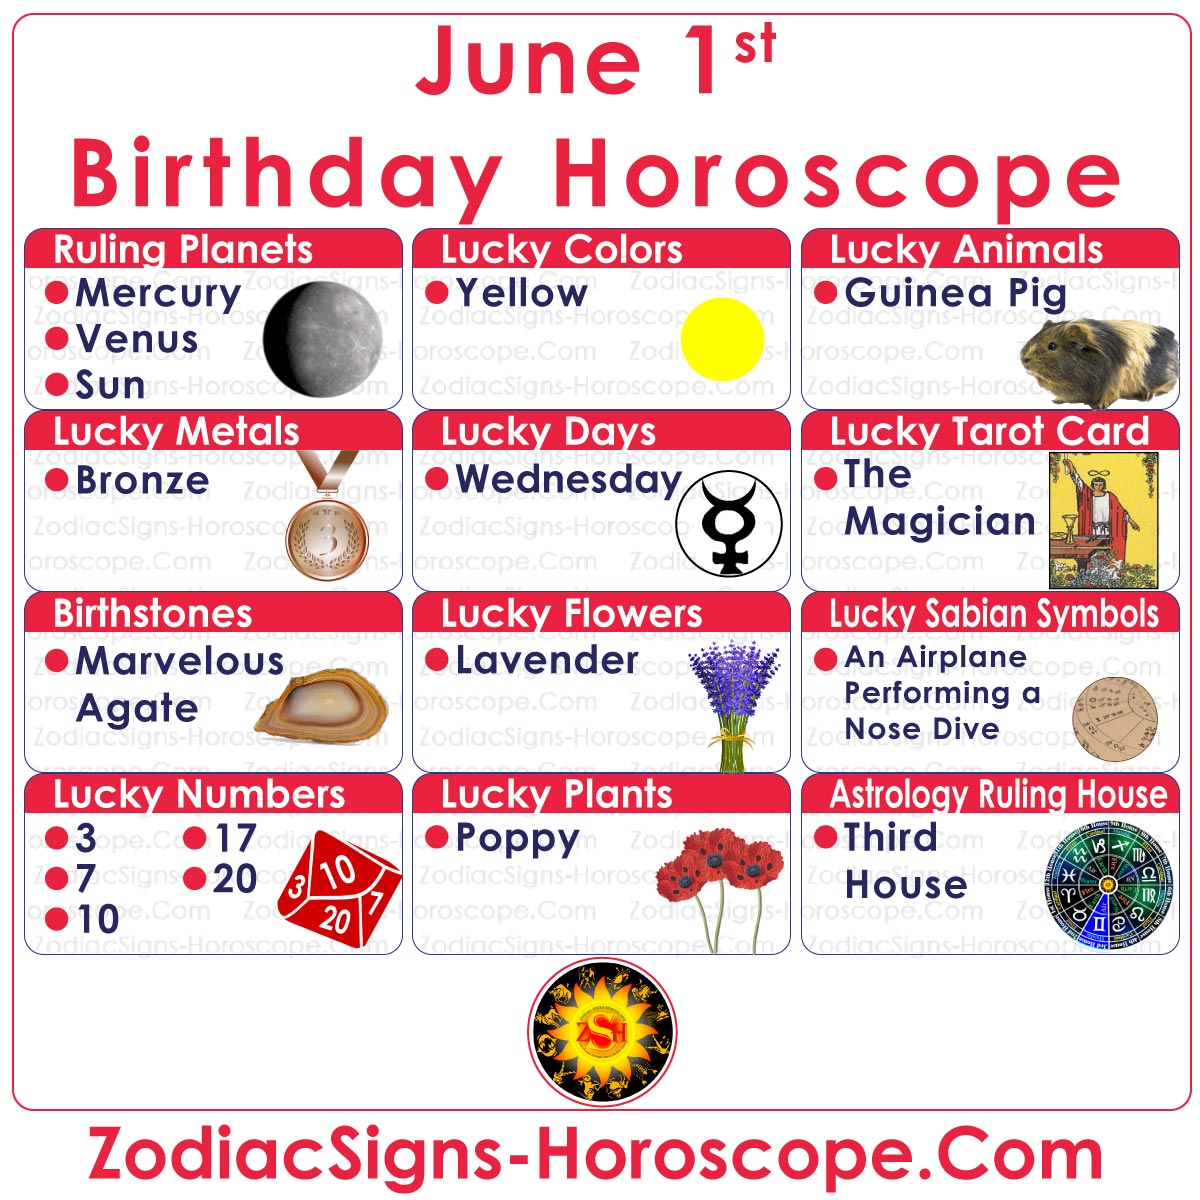 June 1 Zodiac Lucky Numbers, Days, Colors and more